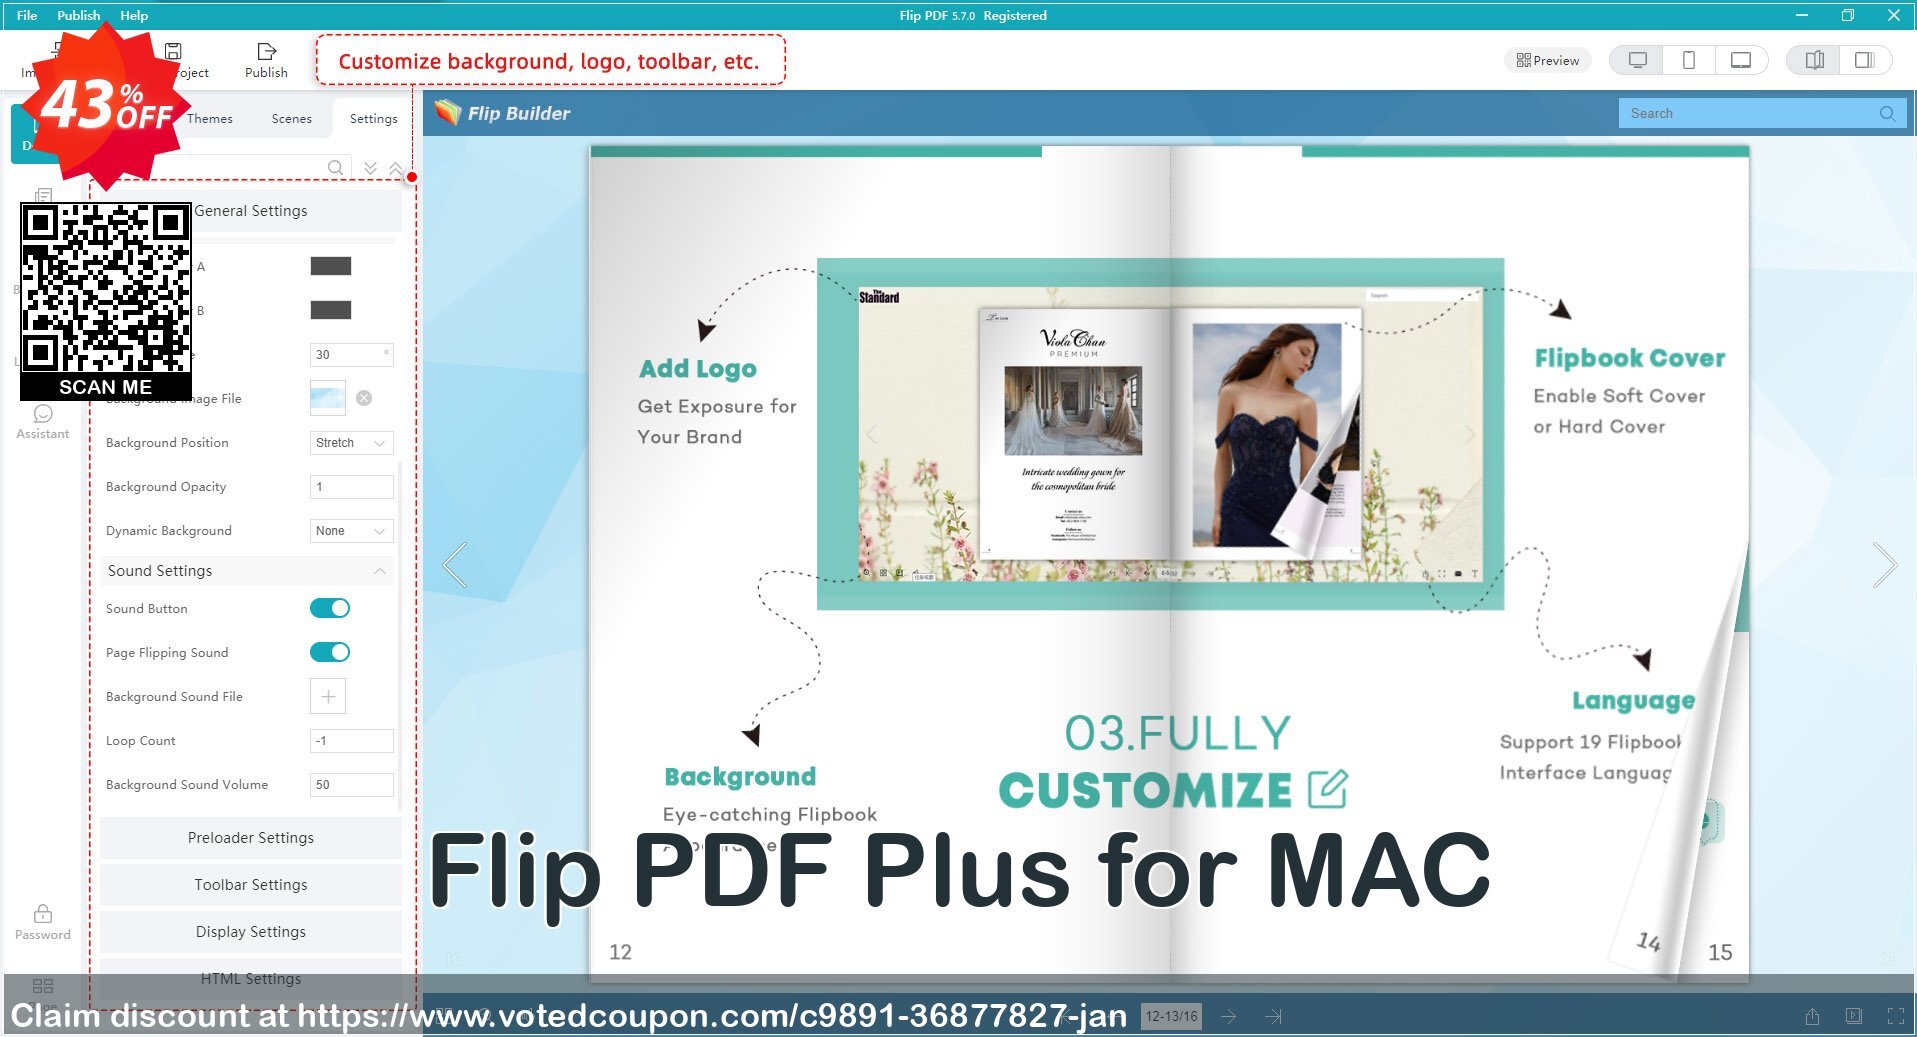 Flip PDF Plus for MAC voted-on promotion codes